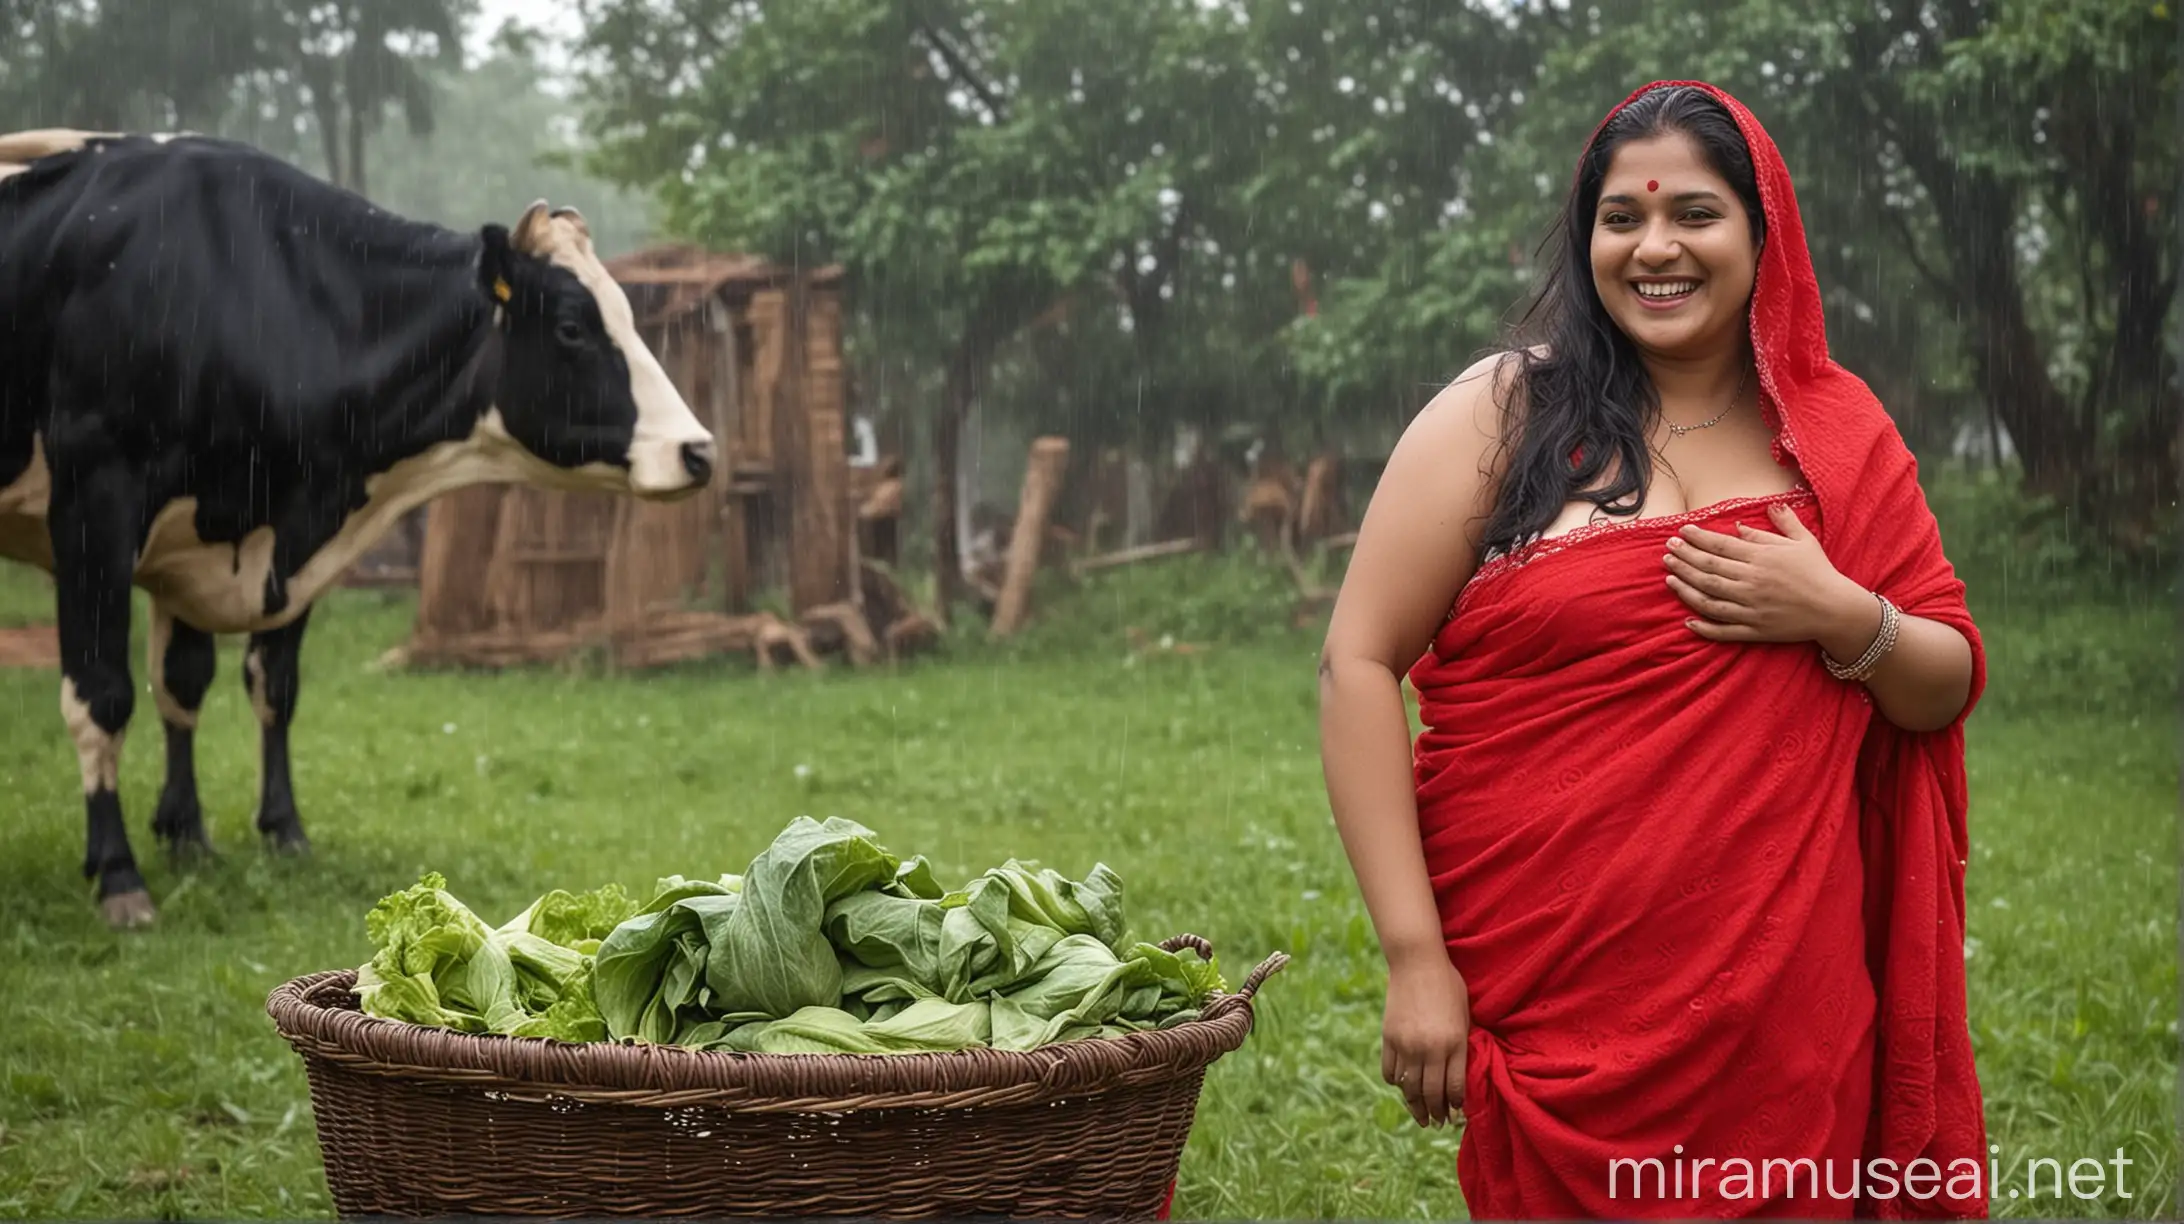 Cheerful Mature Aunty Laughing with Cow in Rainy Vegetable Garden